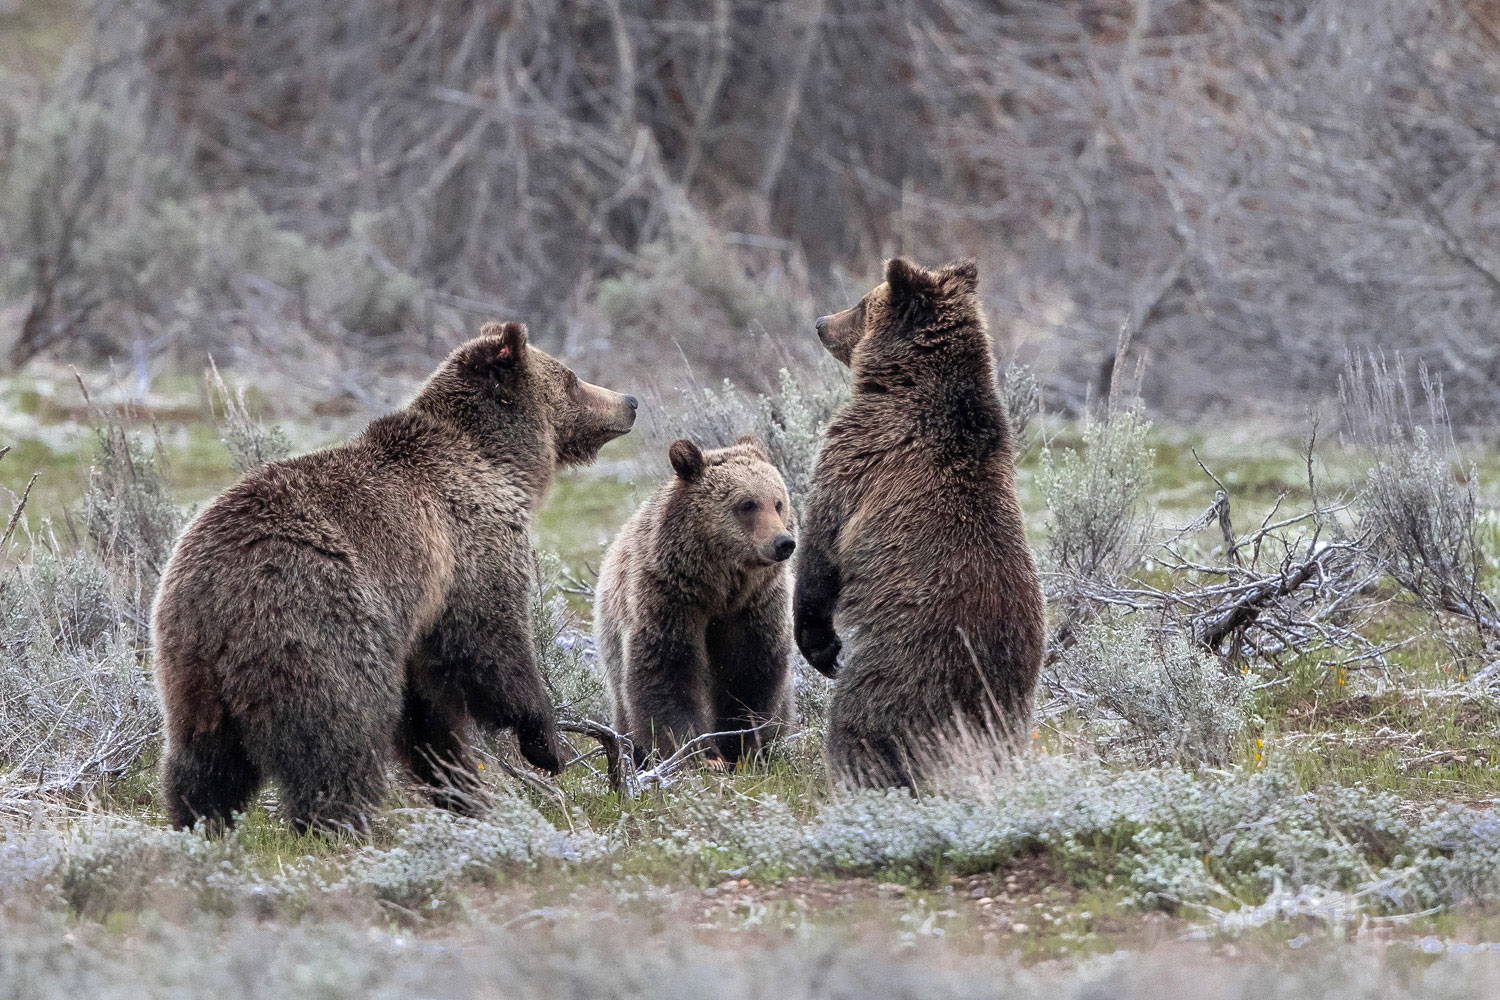 A grizzly bear nicknamed Blondie moves her cubs along.